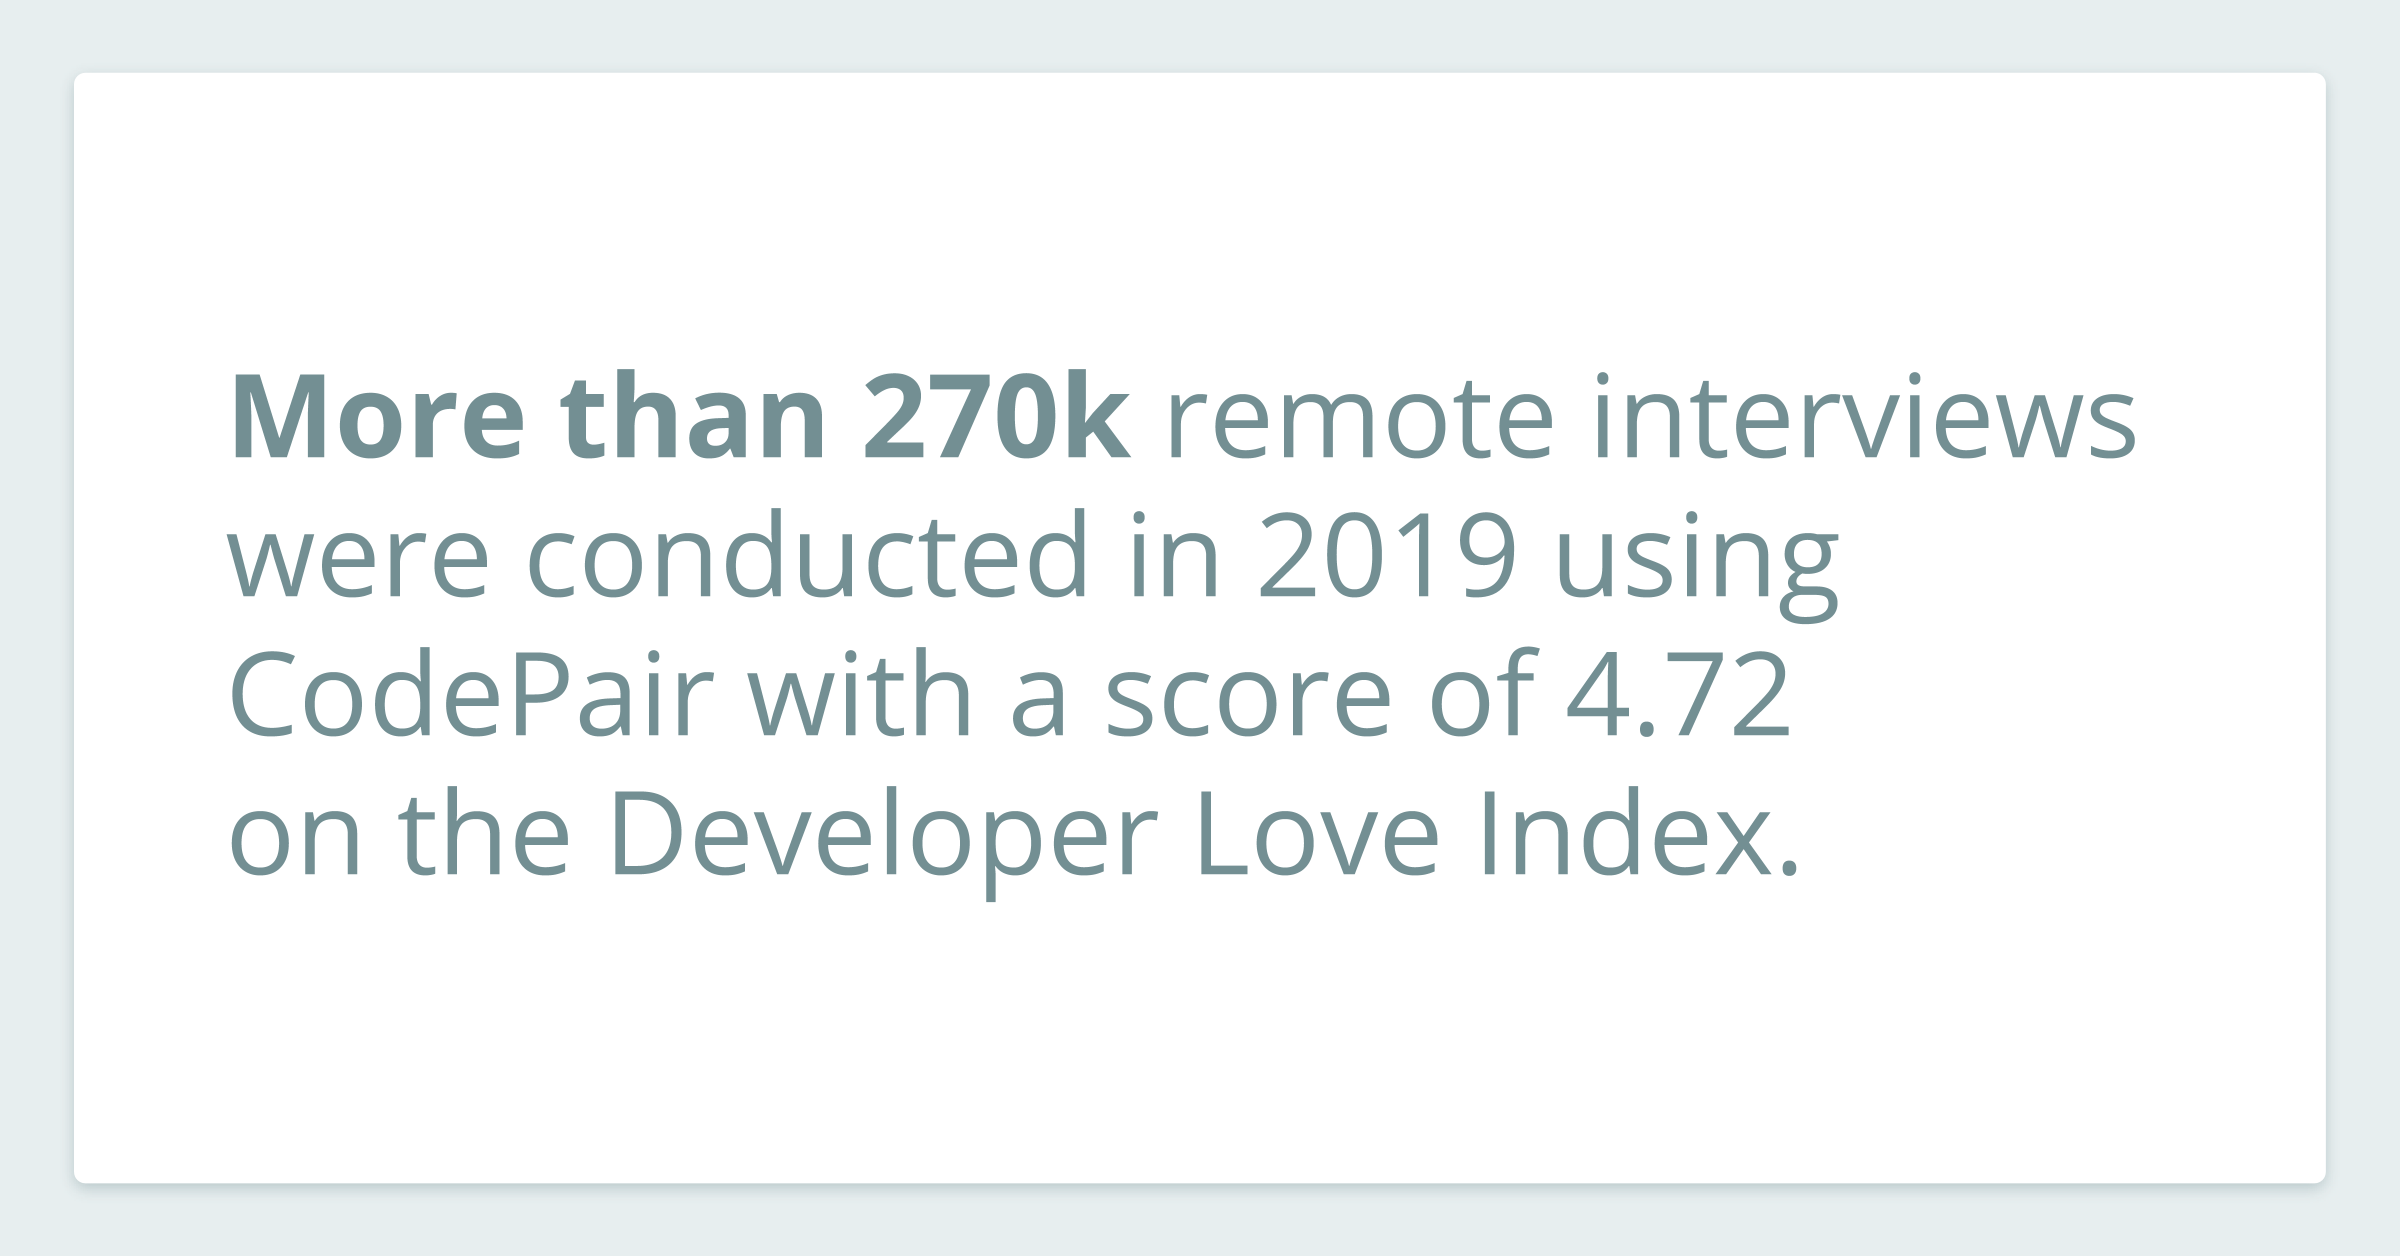 Statistic about the usage of CodePair in 2019